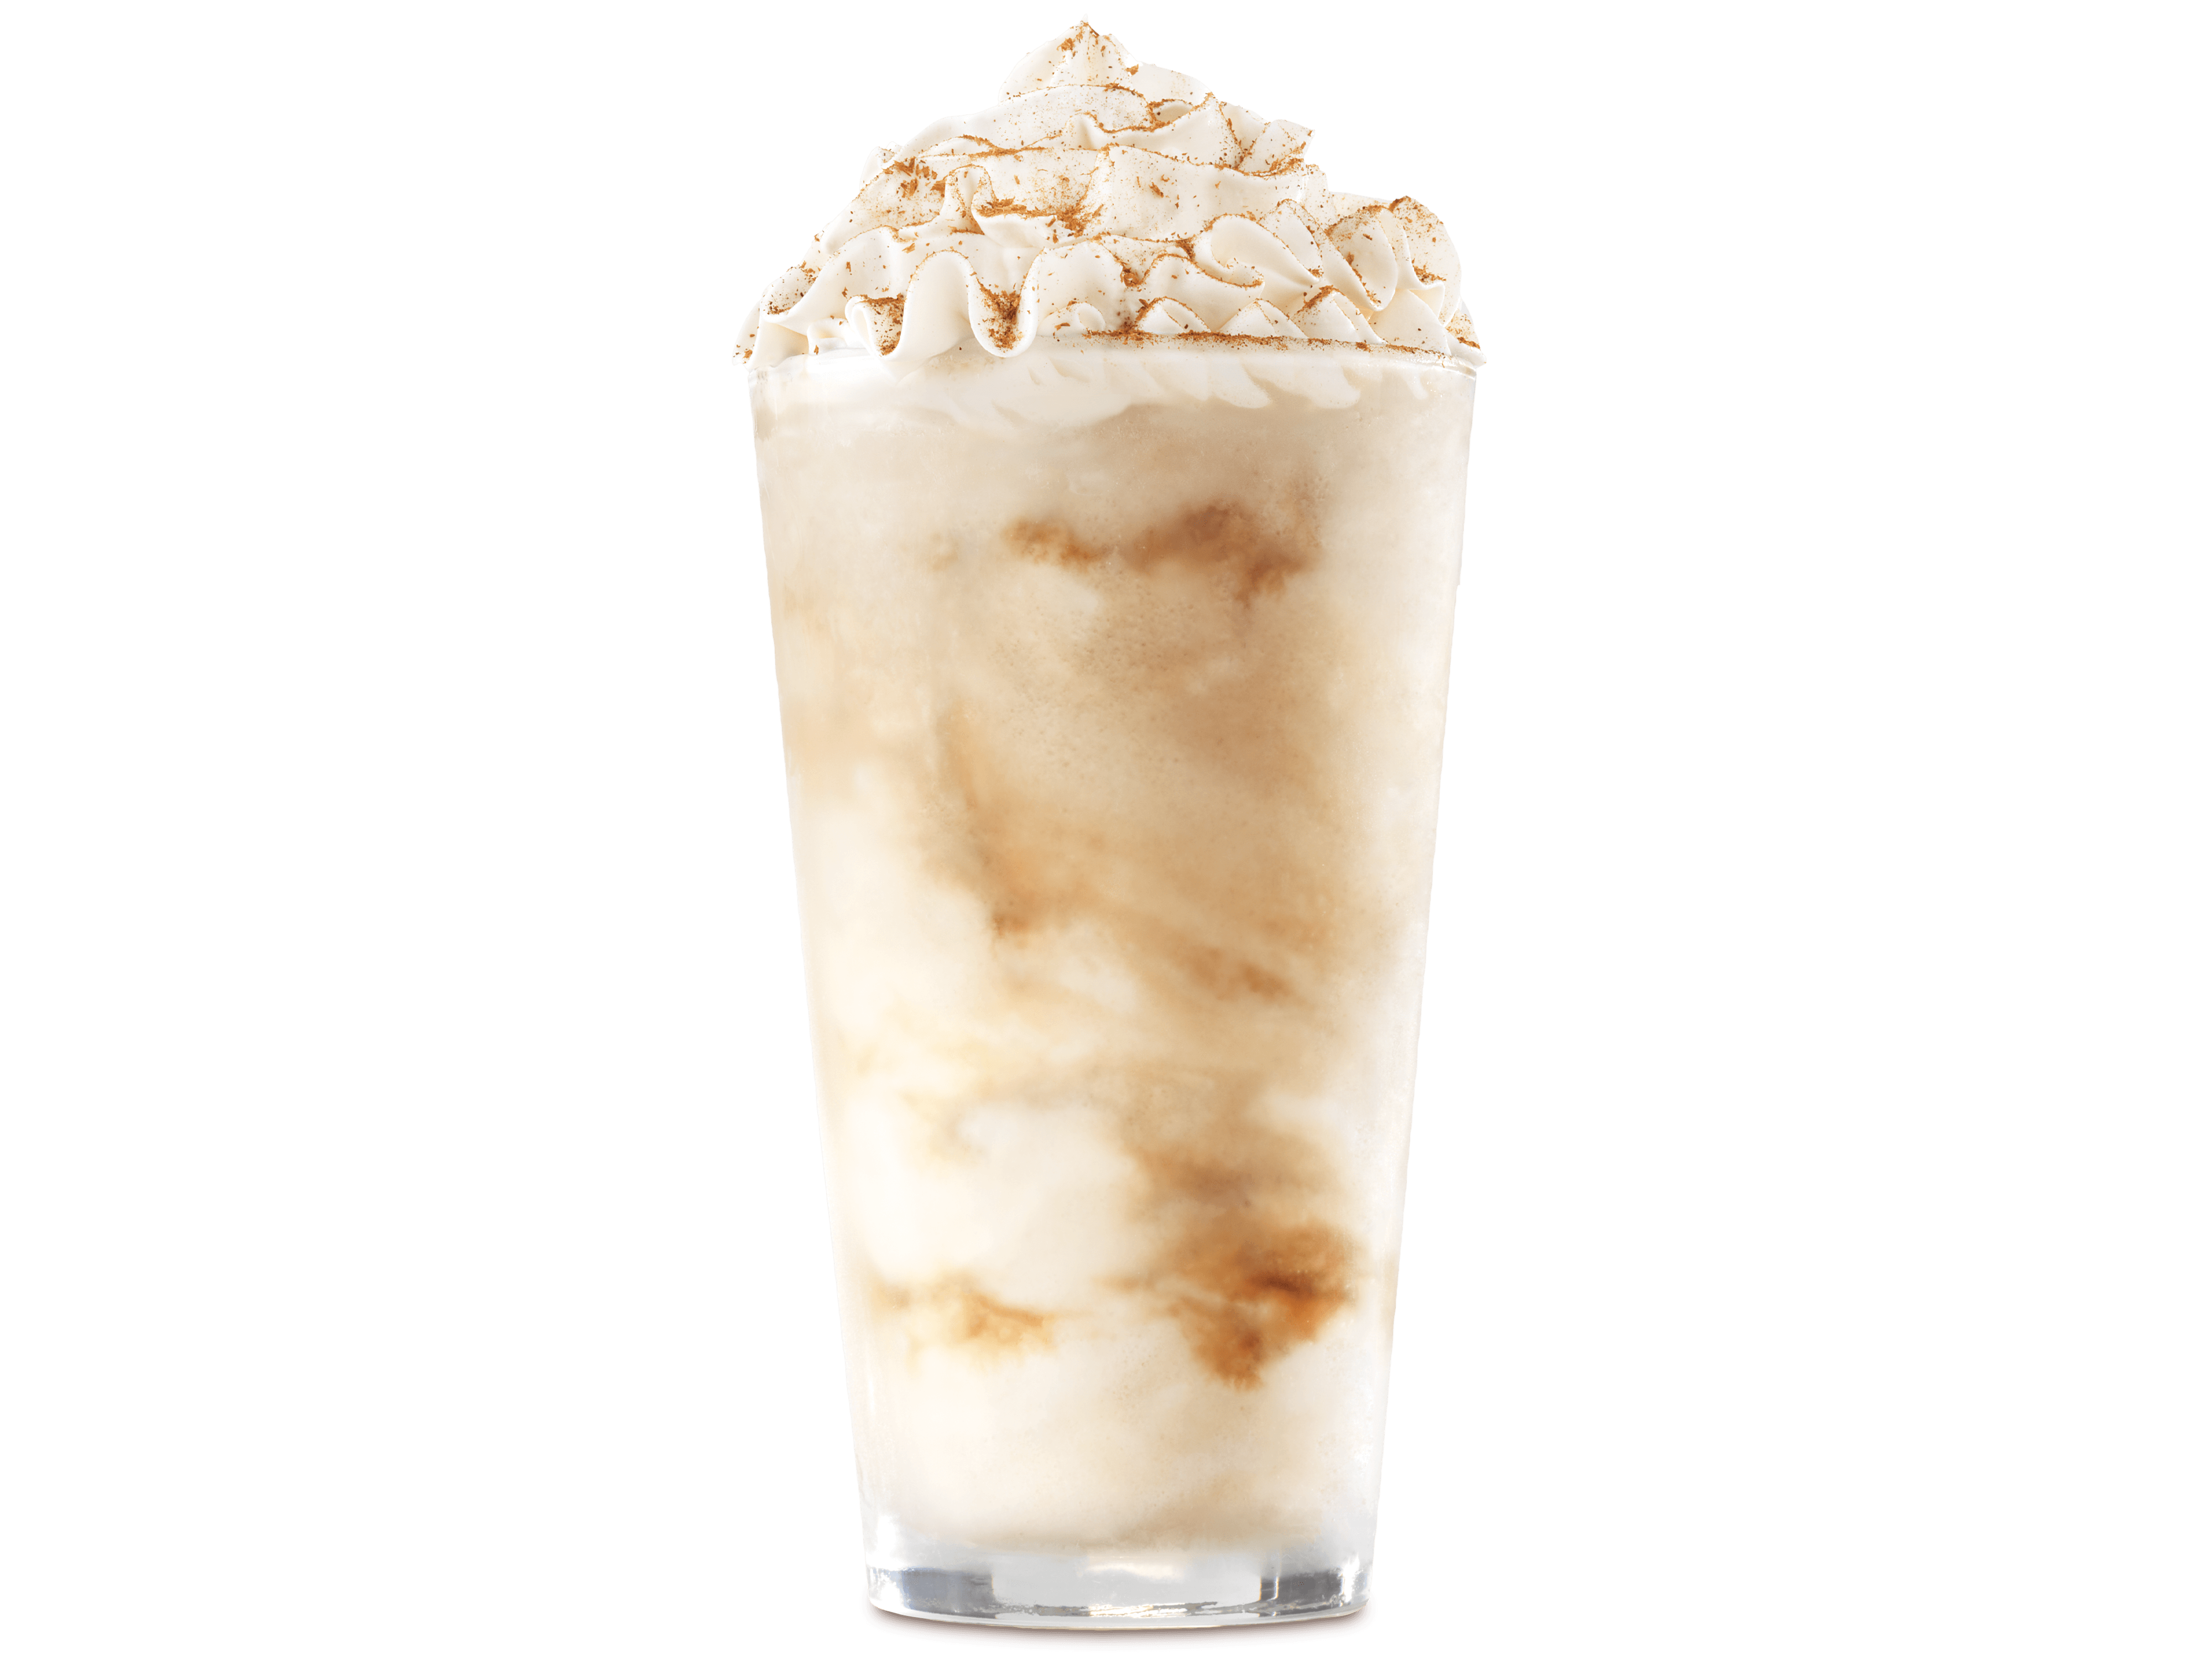 Arby's Large Caramel Cinnamon Shake Nutrition Facts